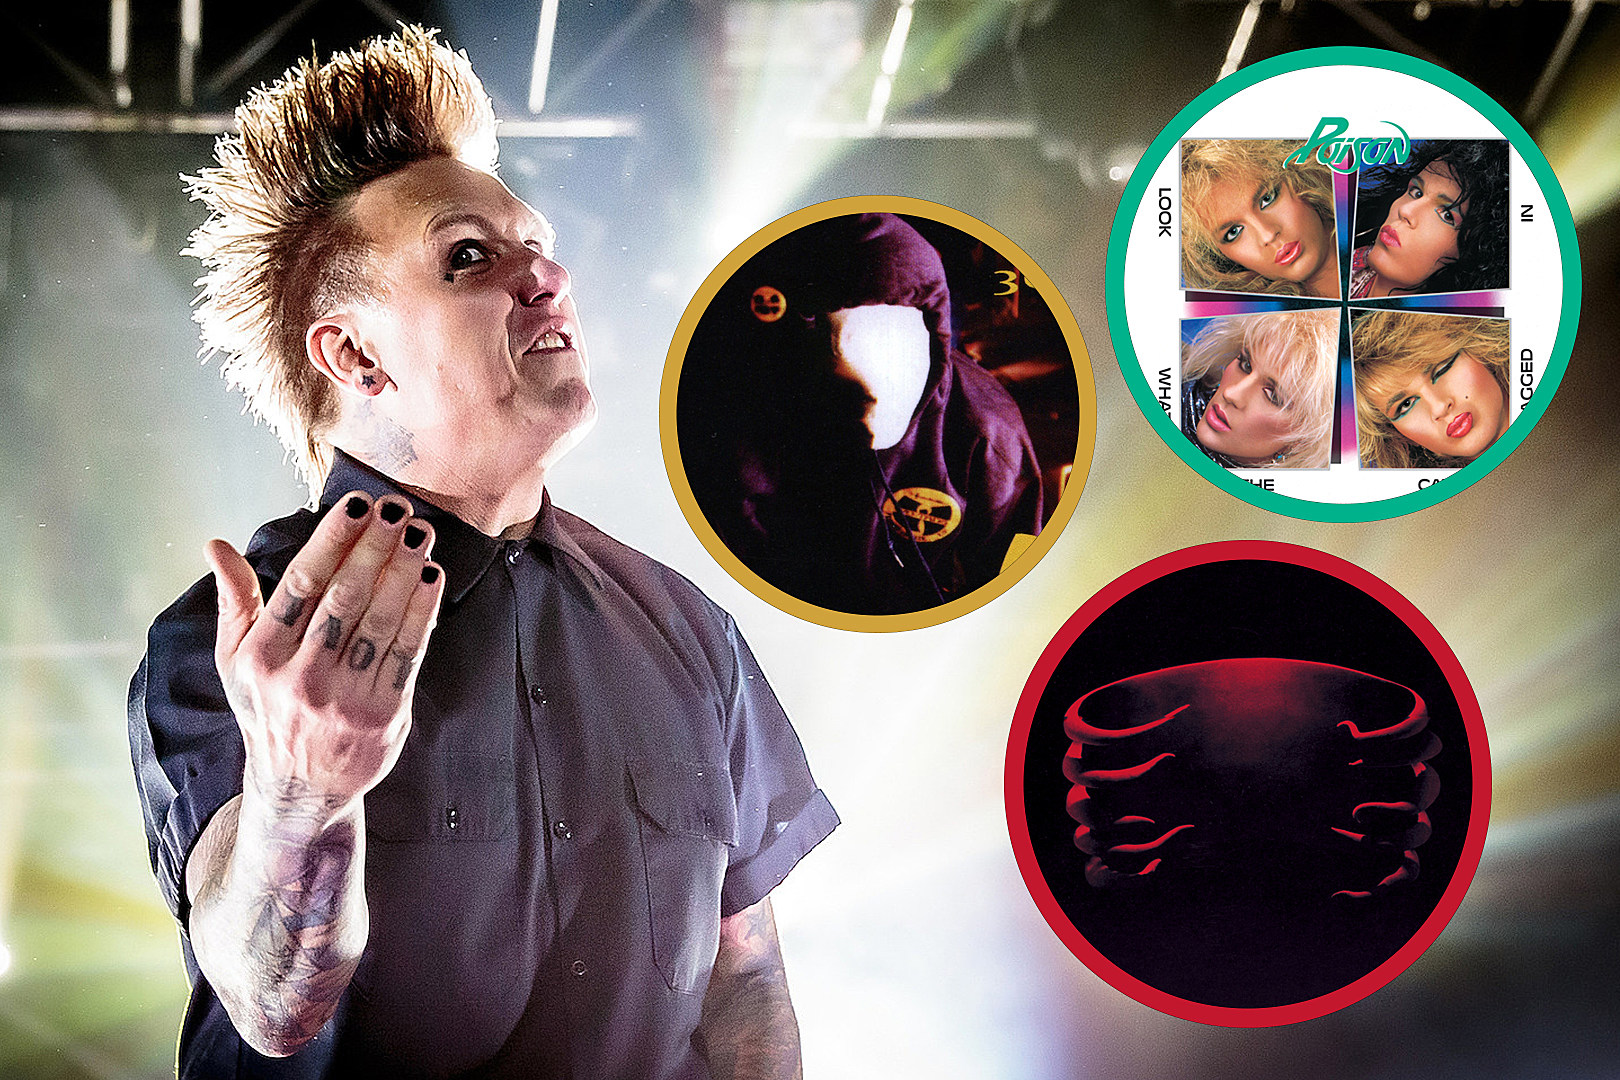 Jacoby Shaddix's 10 Favorite Albums When He Was a Teenager